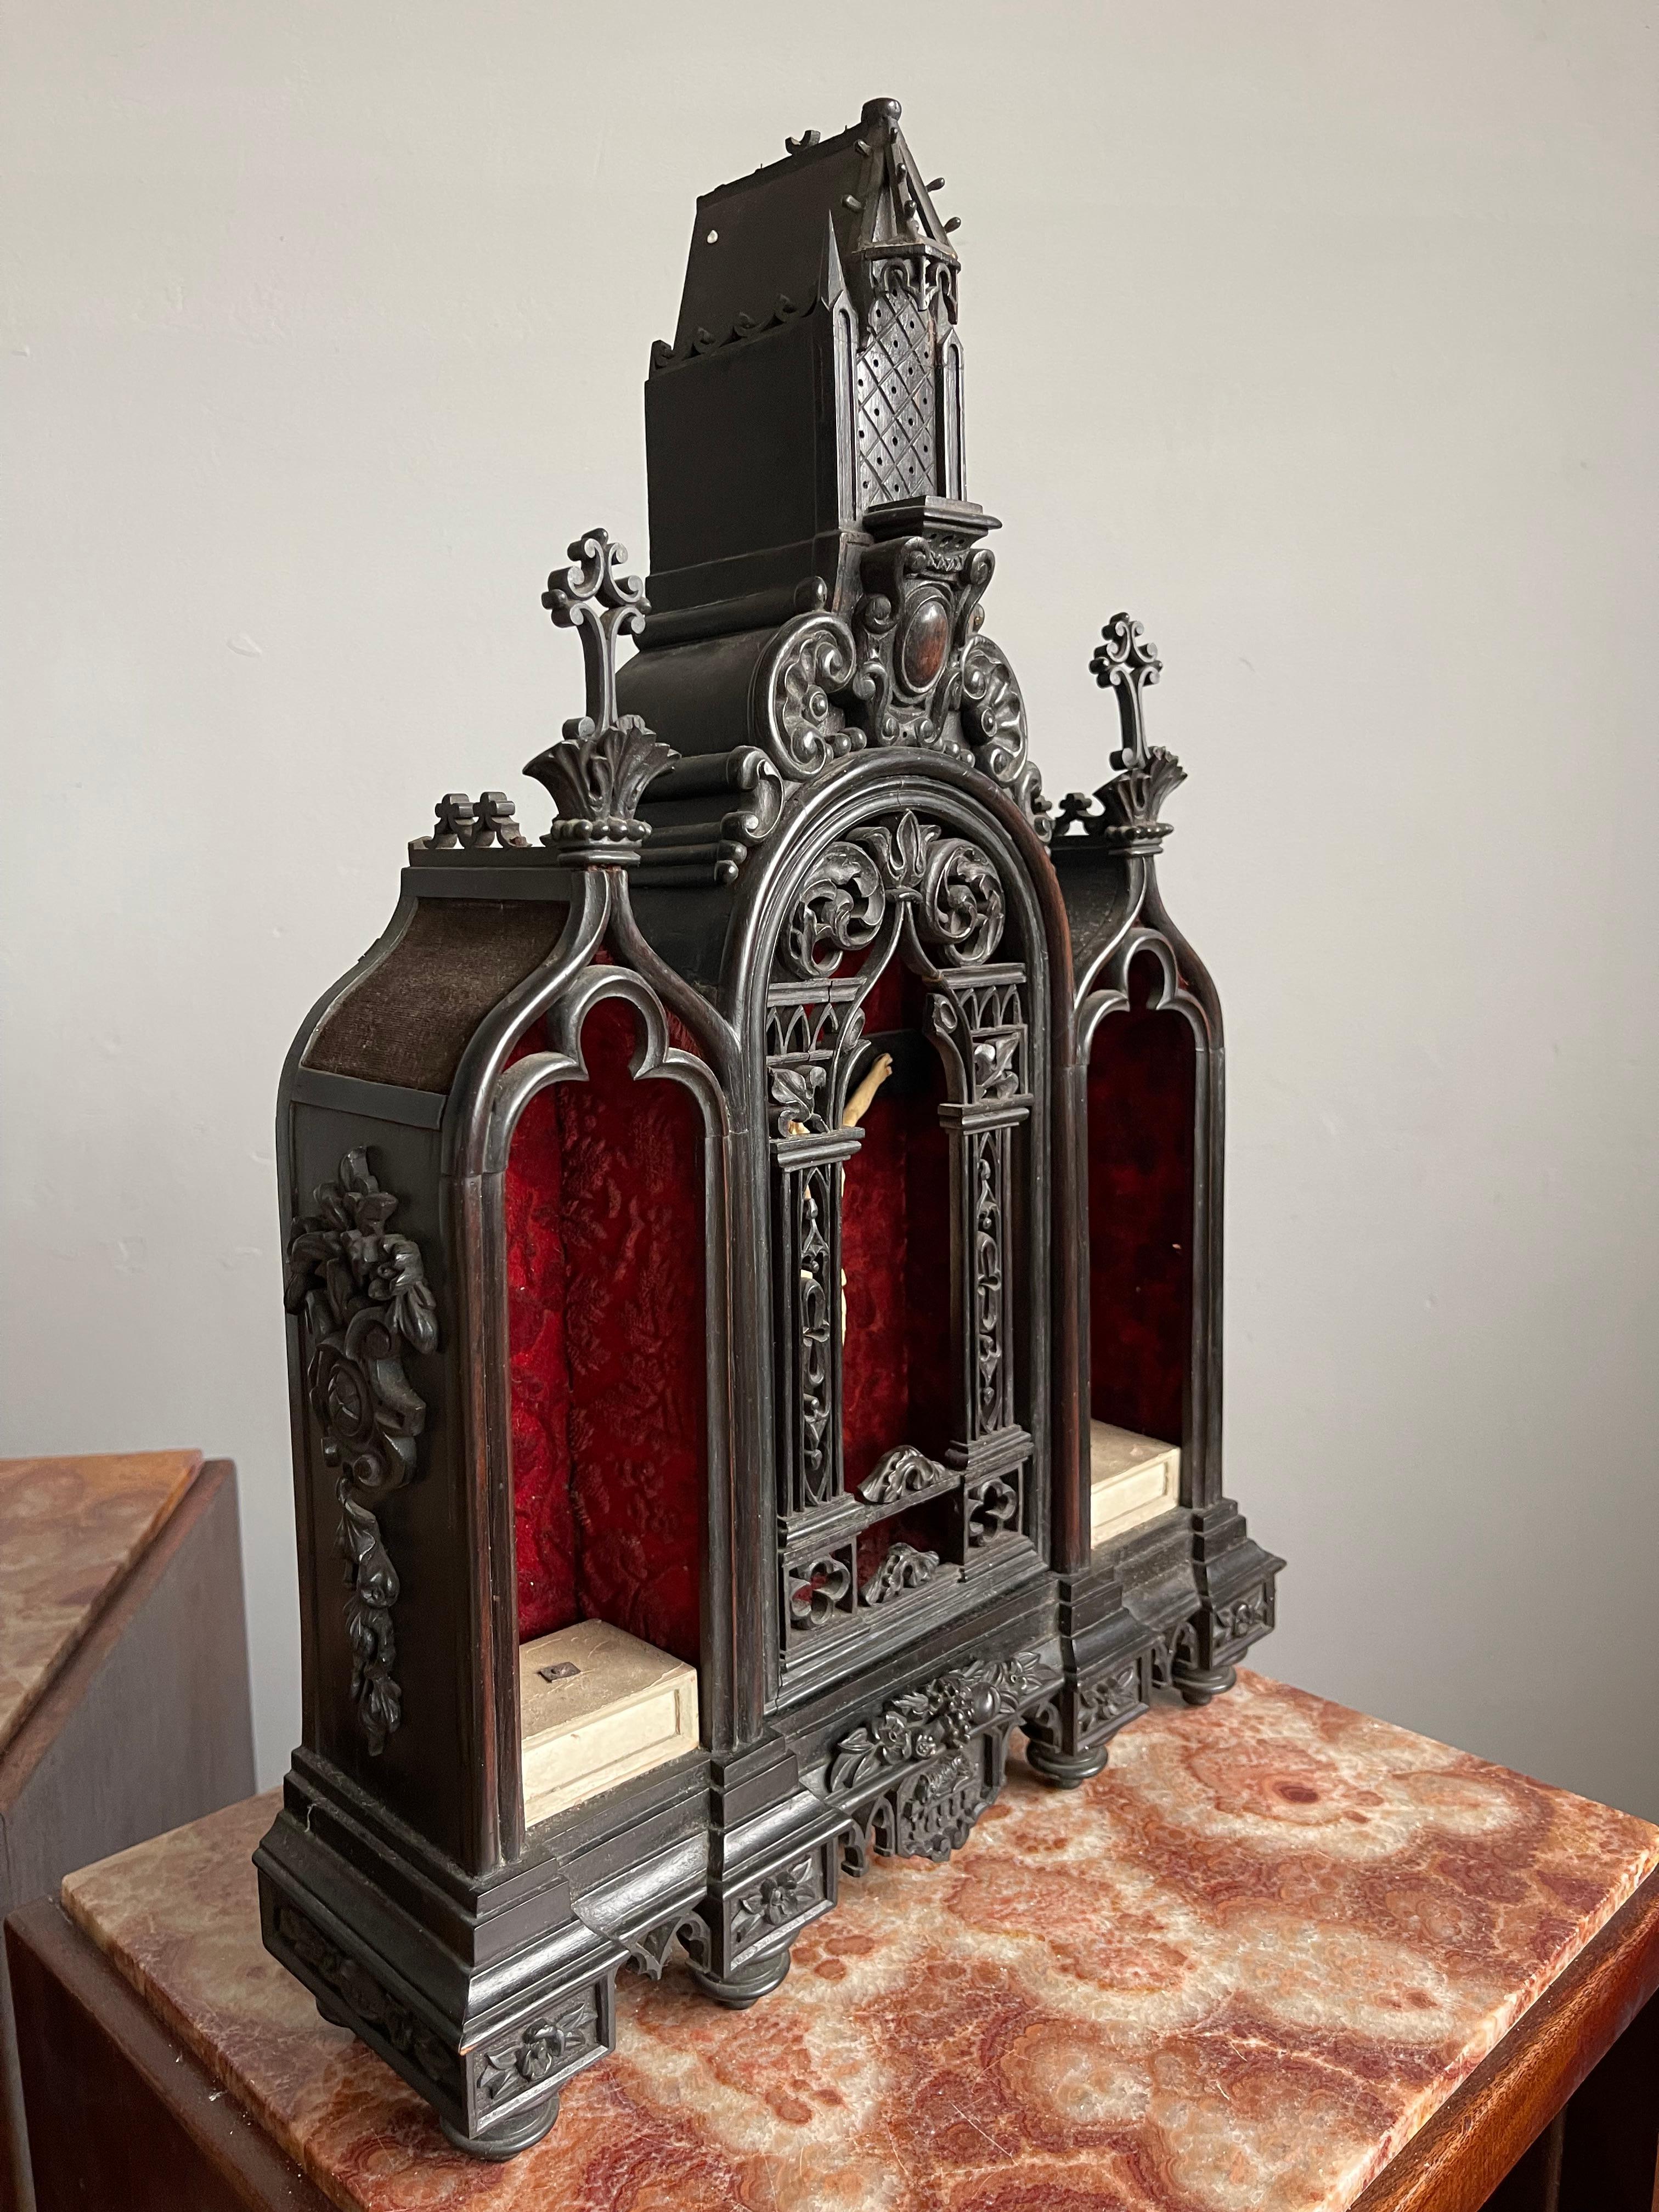 All hand-carved miniature masterpiece, ideal as a home shrine.

This unique and wonderful work of religious art is completely handcrafted and the design is truly beautiful. This 19th century antique comes with a great many ultra fine, handcarved